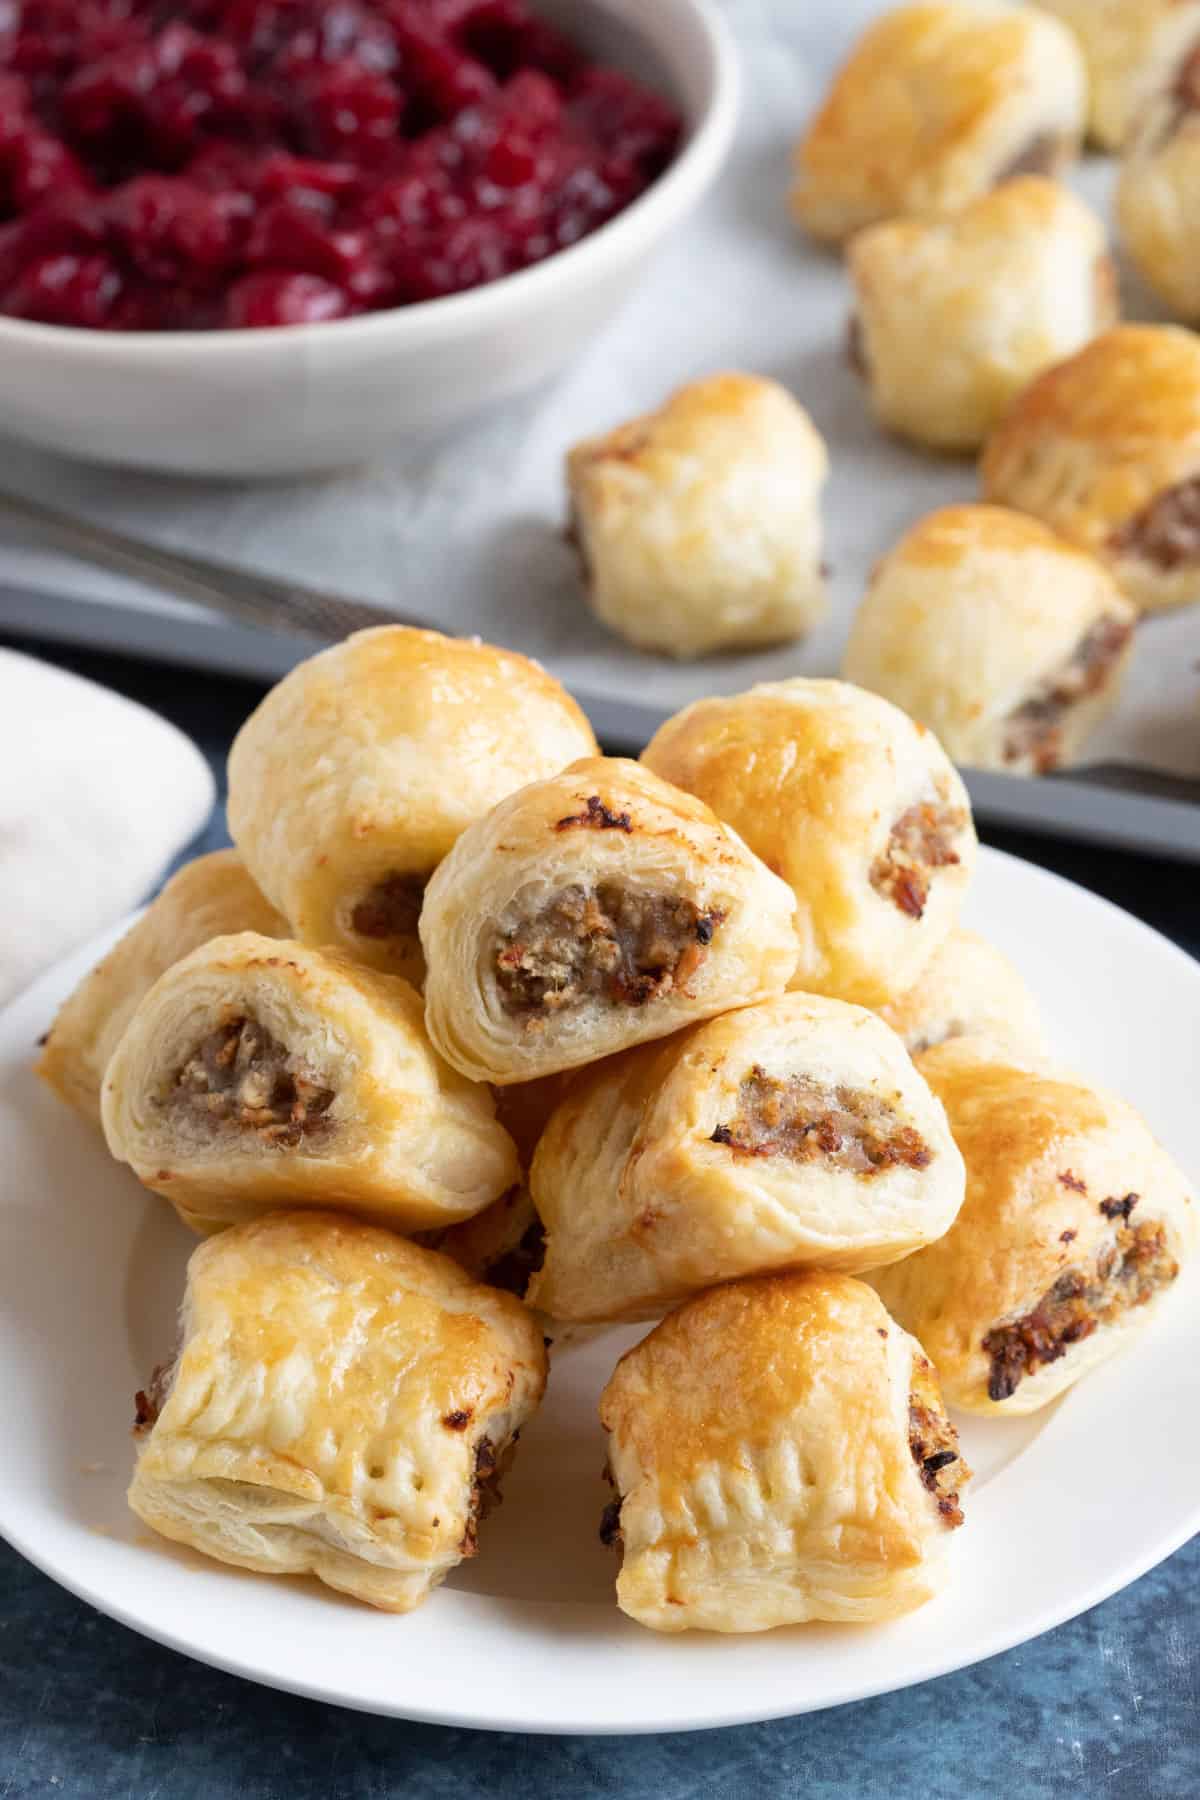 A plate of cocktail sausage rolls.